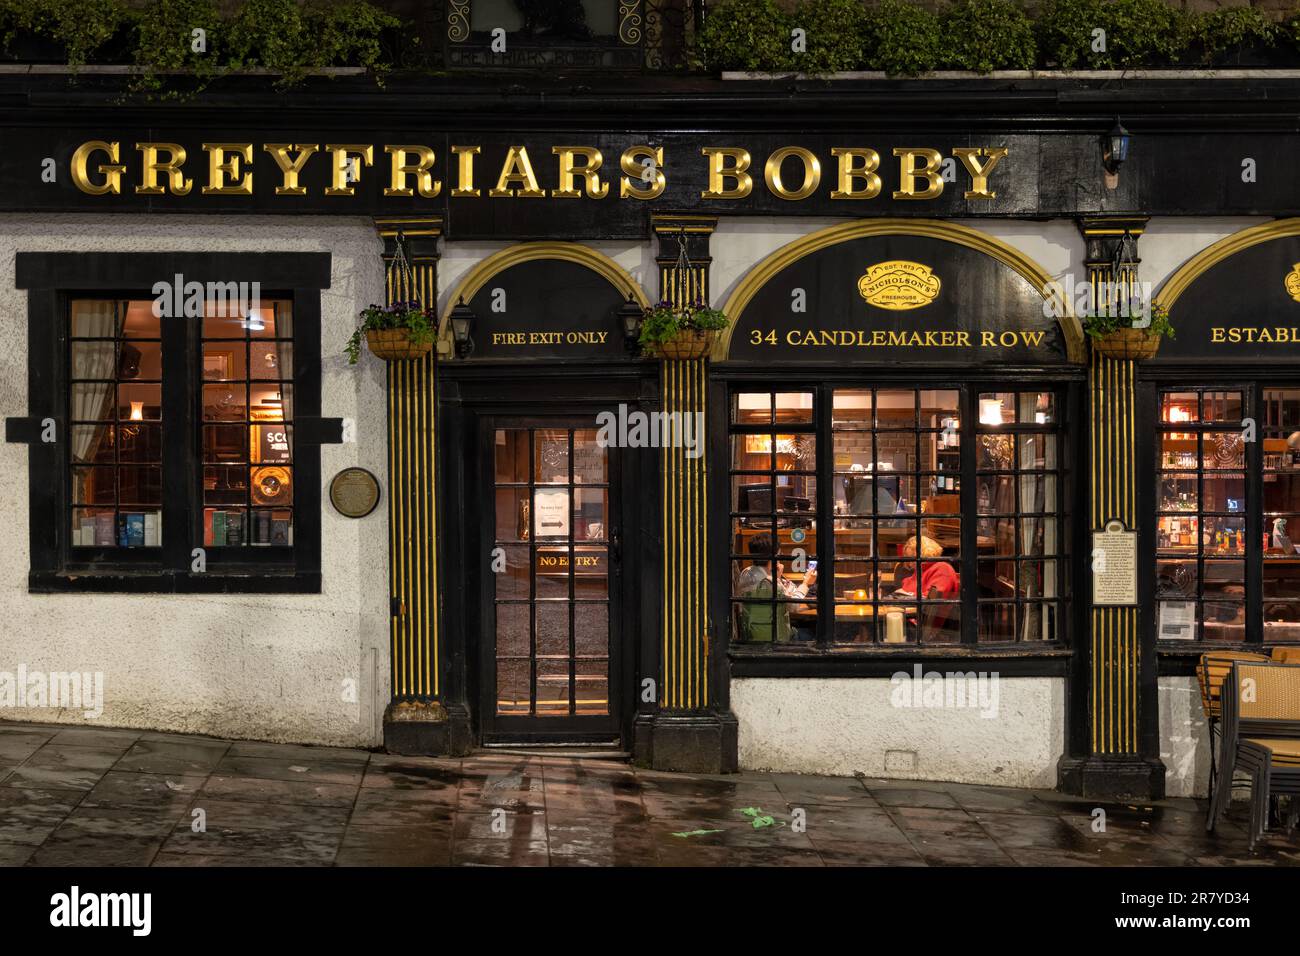 The Greyfriars Bobby Bar at night in city of Edinburgh, Scotland. Historic pub at 34 Candlemaker Row, famous for a legend of a dog known as Bobby. Stock Photo